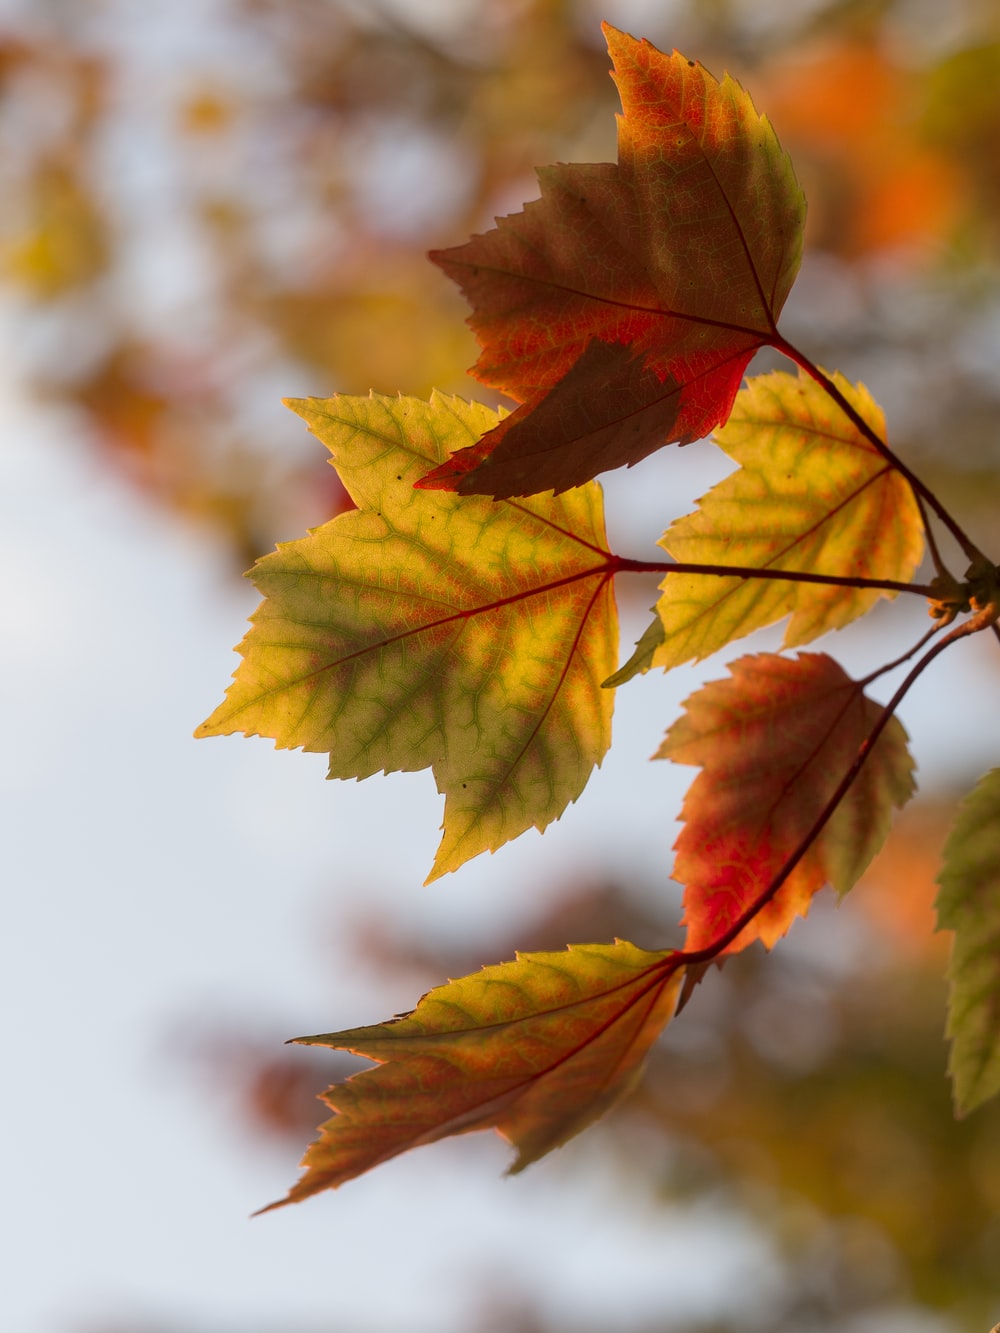 Autumn Leaves Picture. Download Free Image